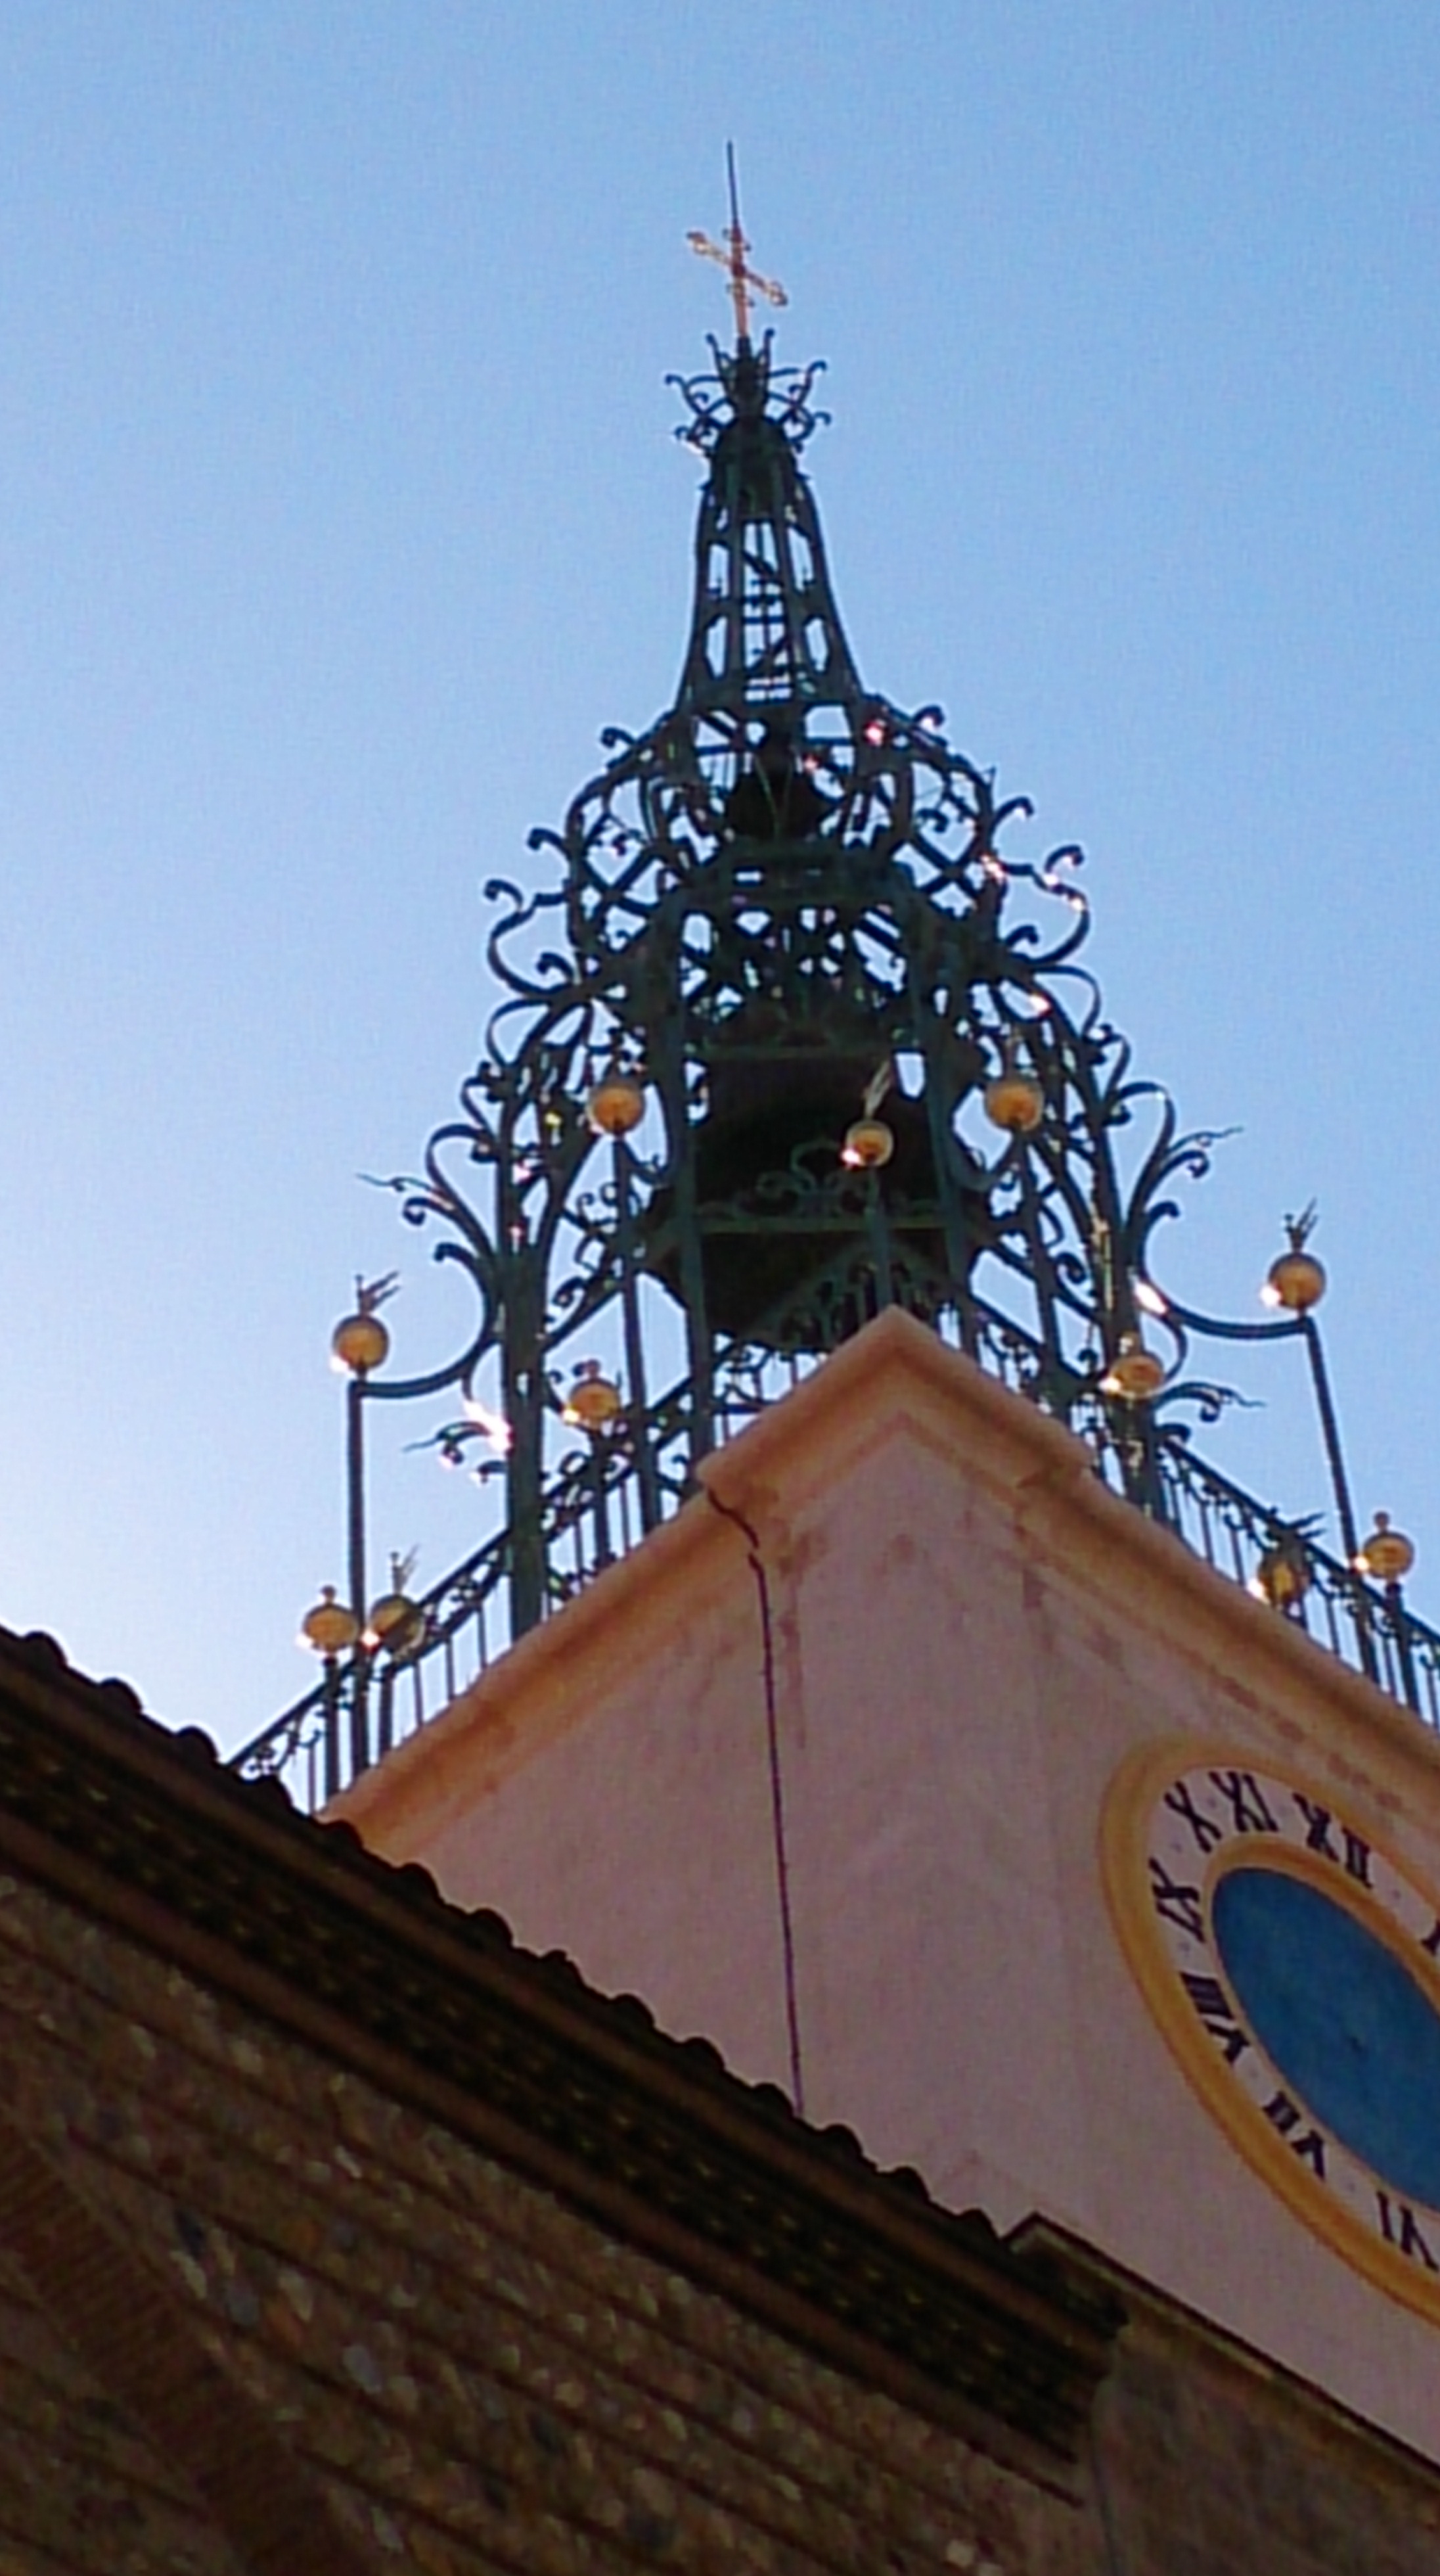 The unusual bell tower on the cathedral